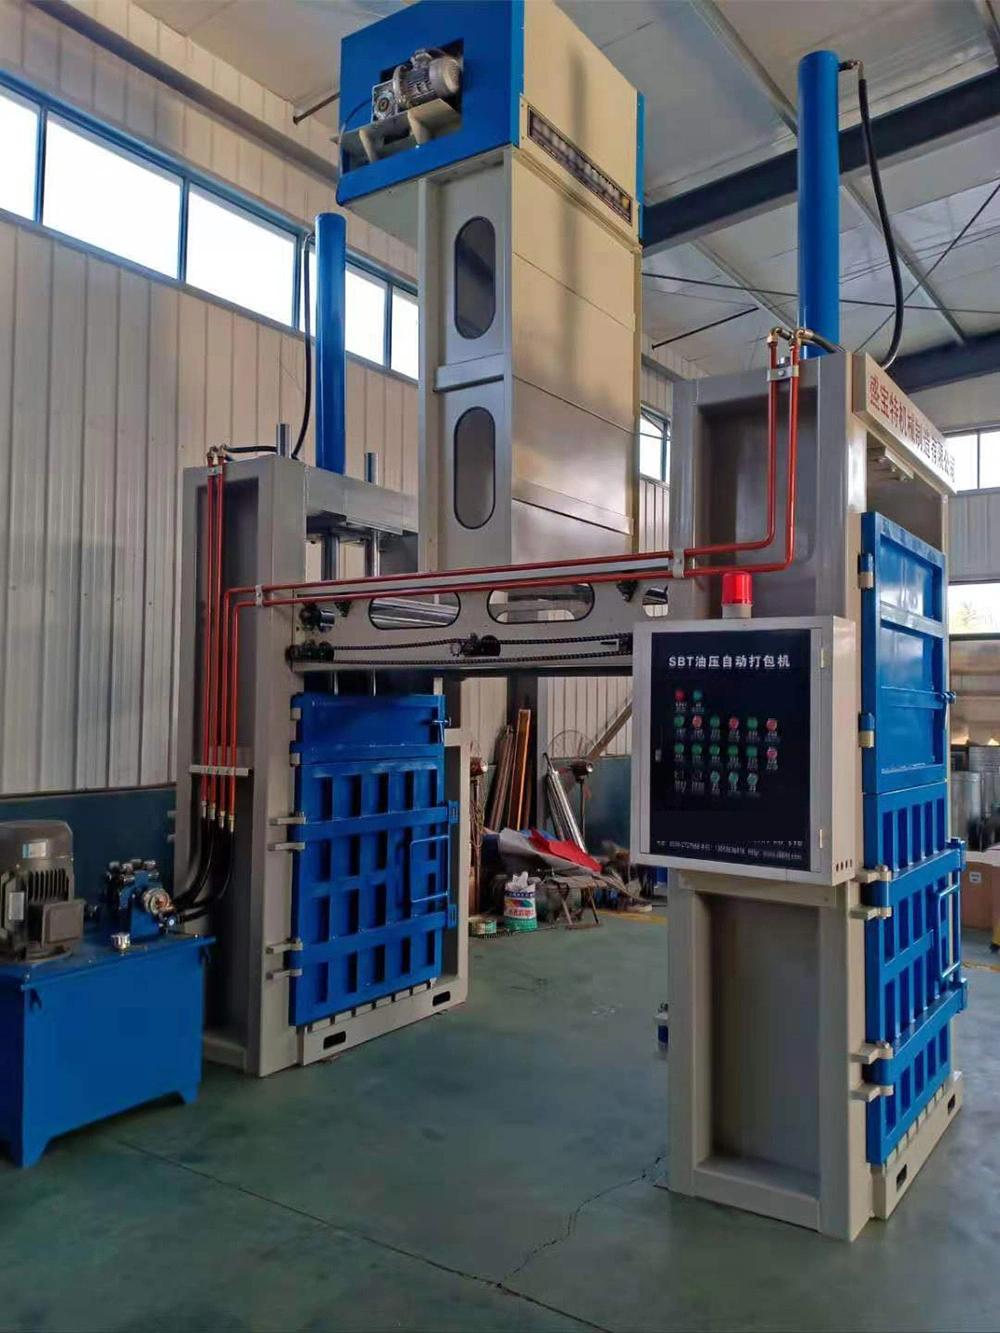 Vertical U-Shaped Pressure Balance System Baler Hydraulic Press Waste Plastic Film Packaging Machine Factory Price Baler for Recycling Industry